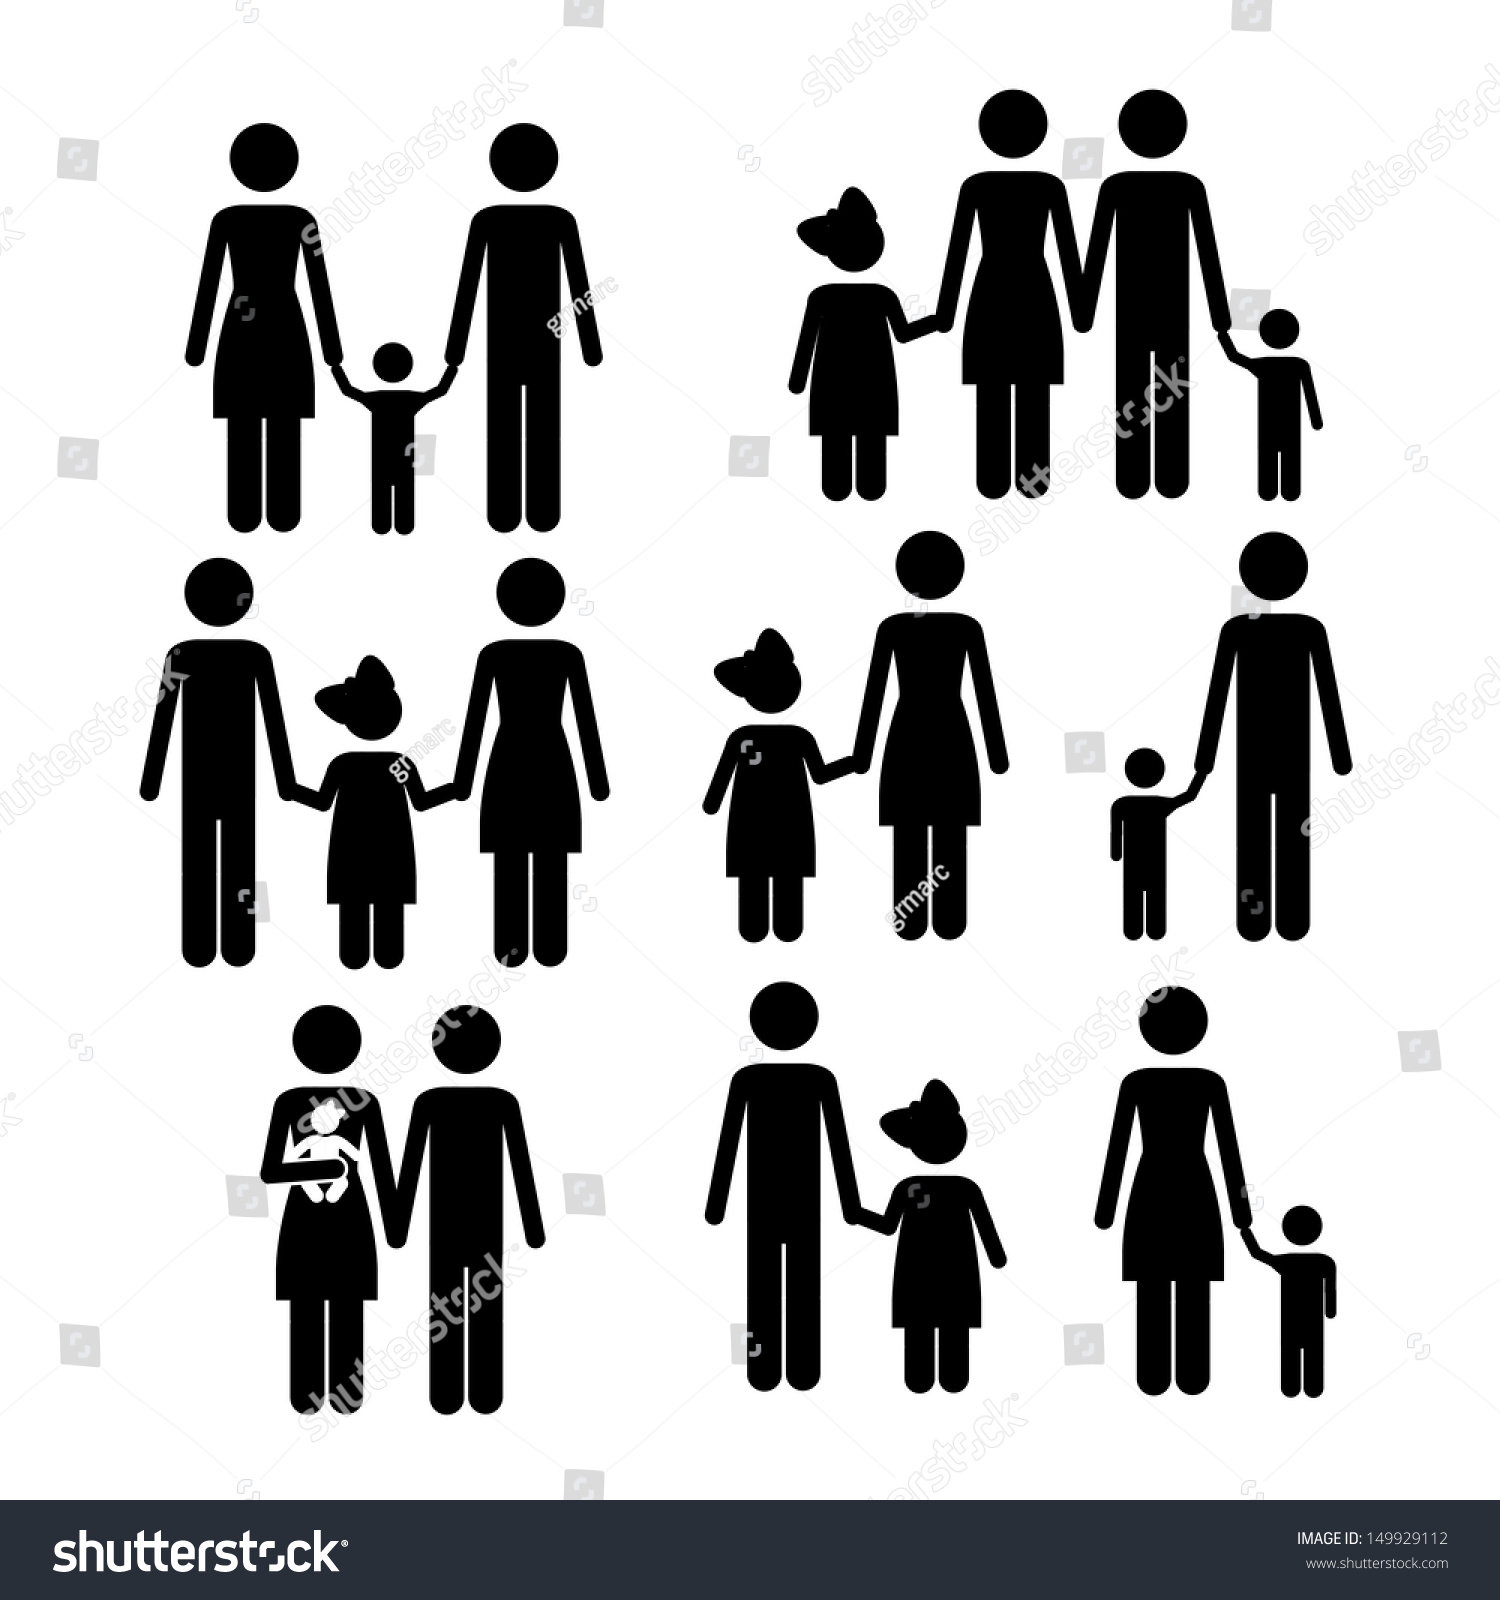 Family Icons Over White Background Vector Illustration - 149929112